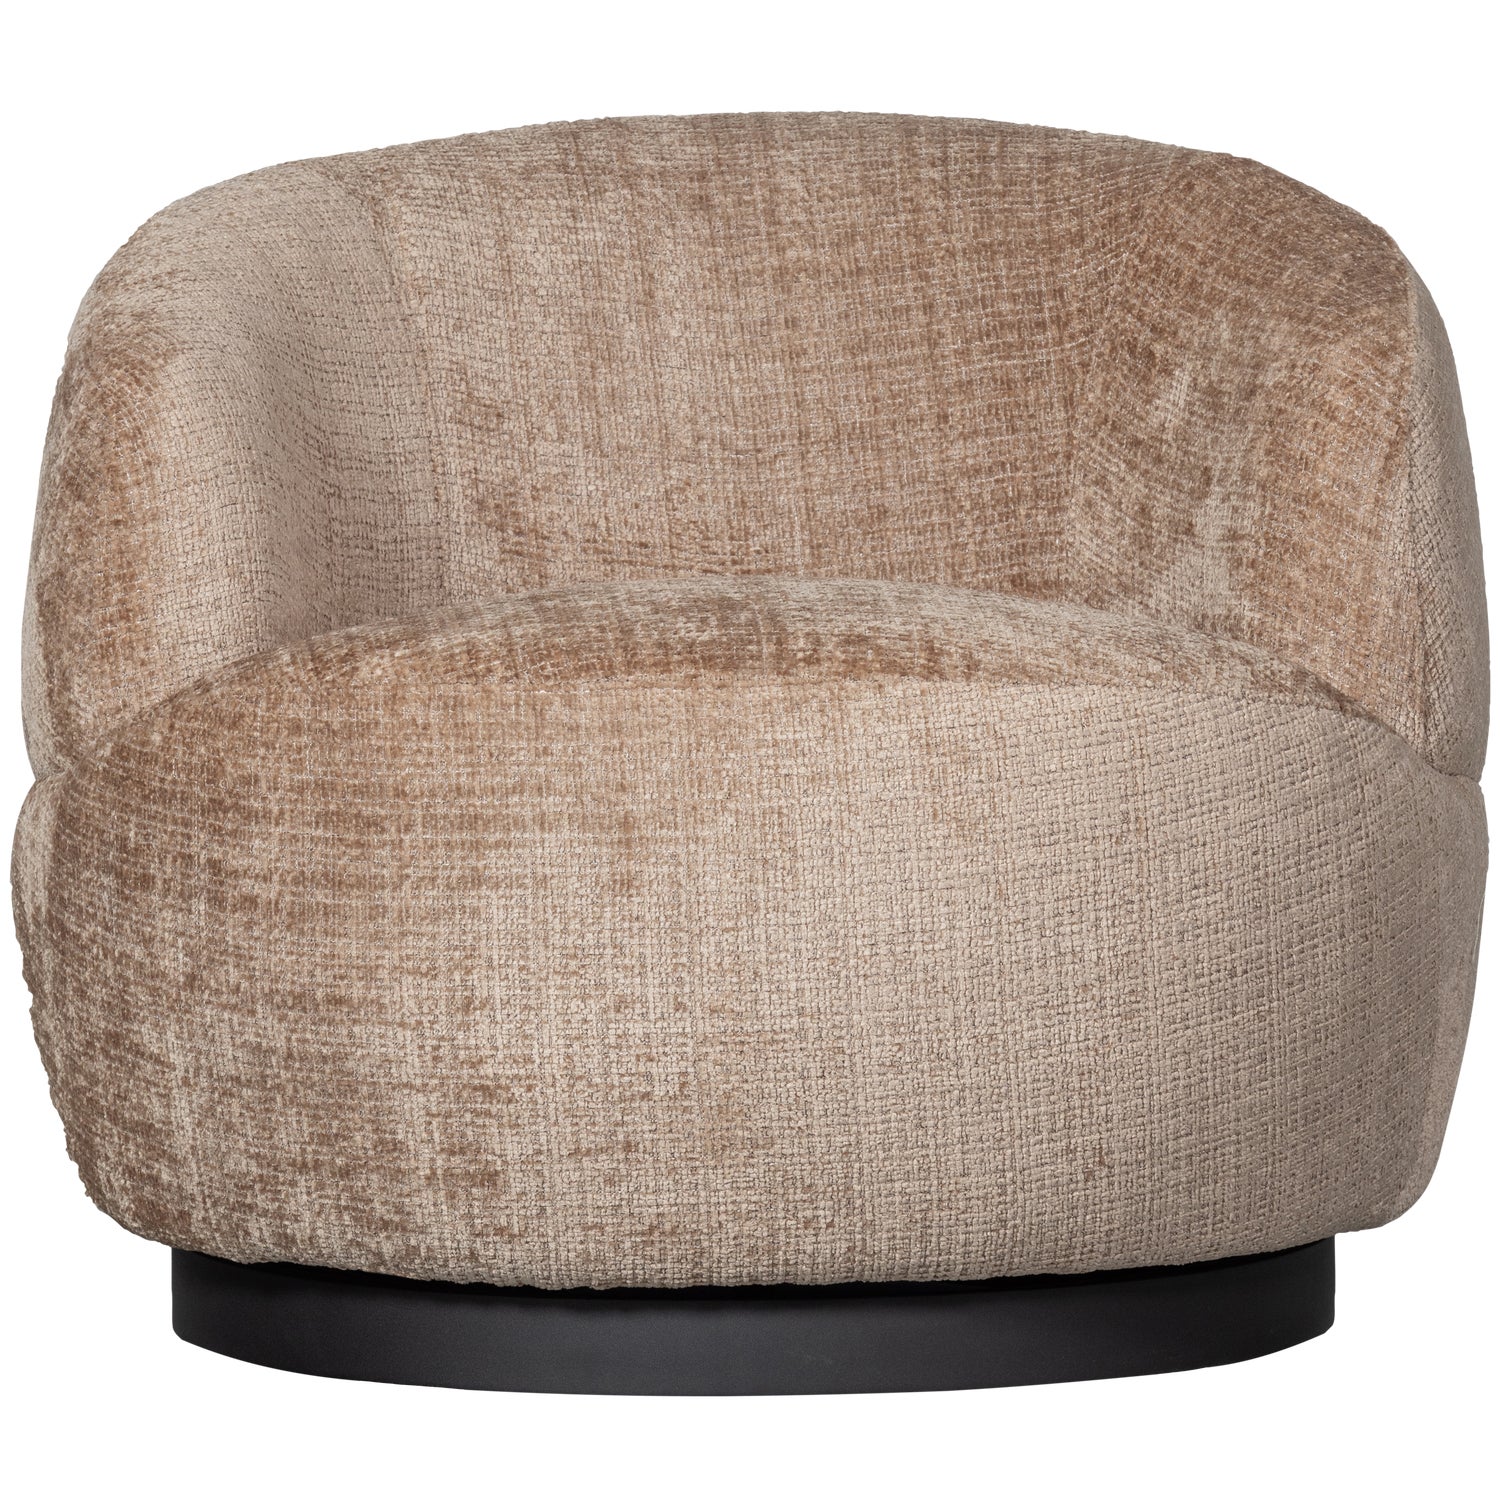 800037-S-01_VS_FA_Woolly_draaifauteuil_chenille_zand.png?auto=webp&format=png&width=1500&height=1500